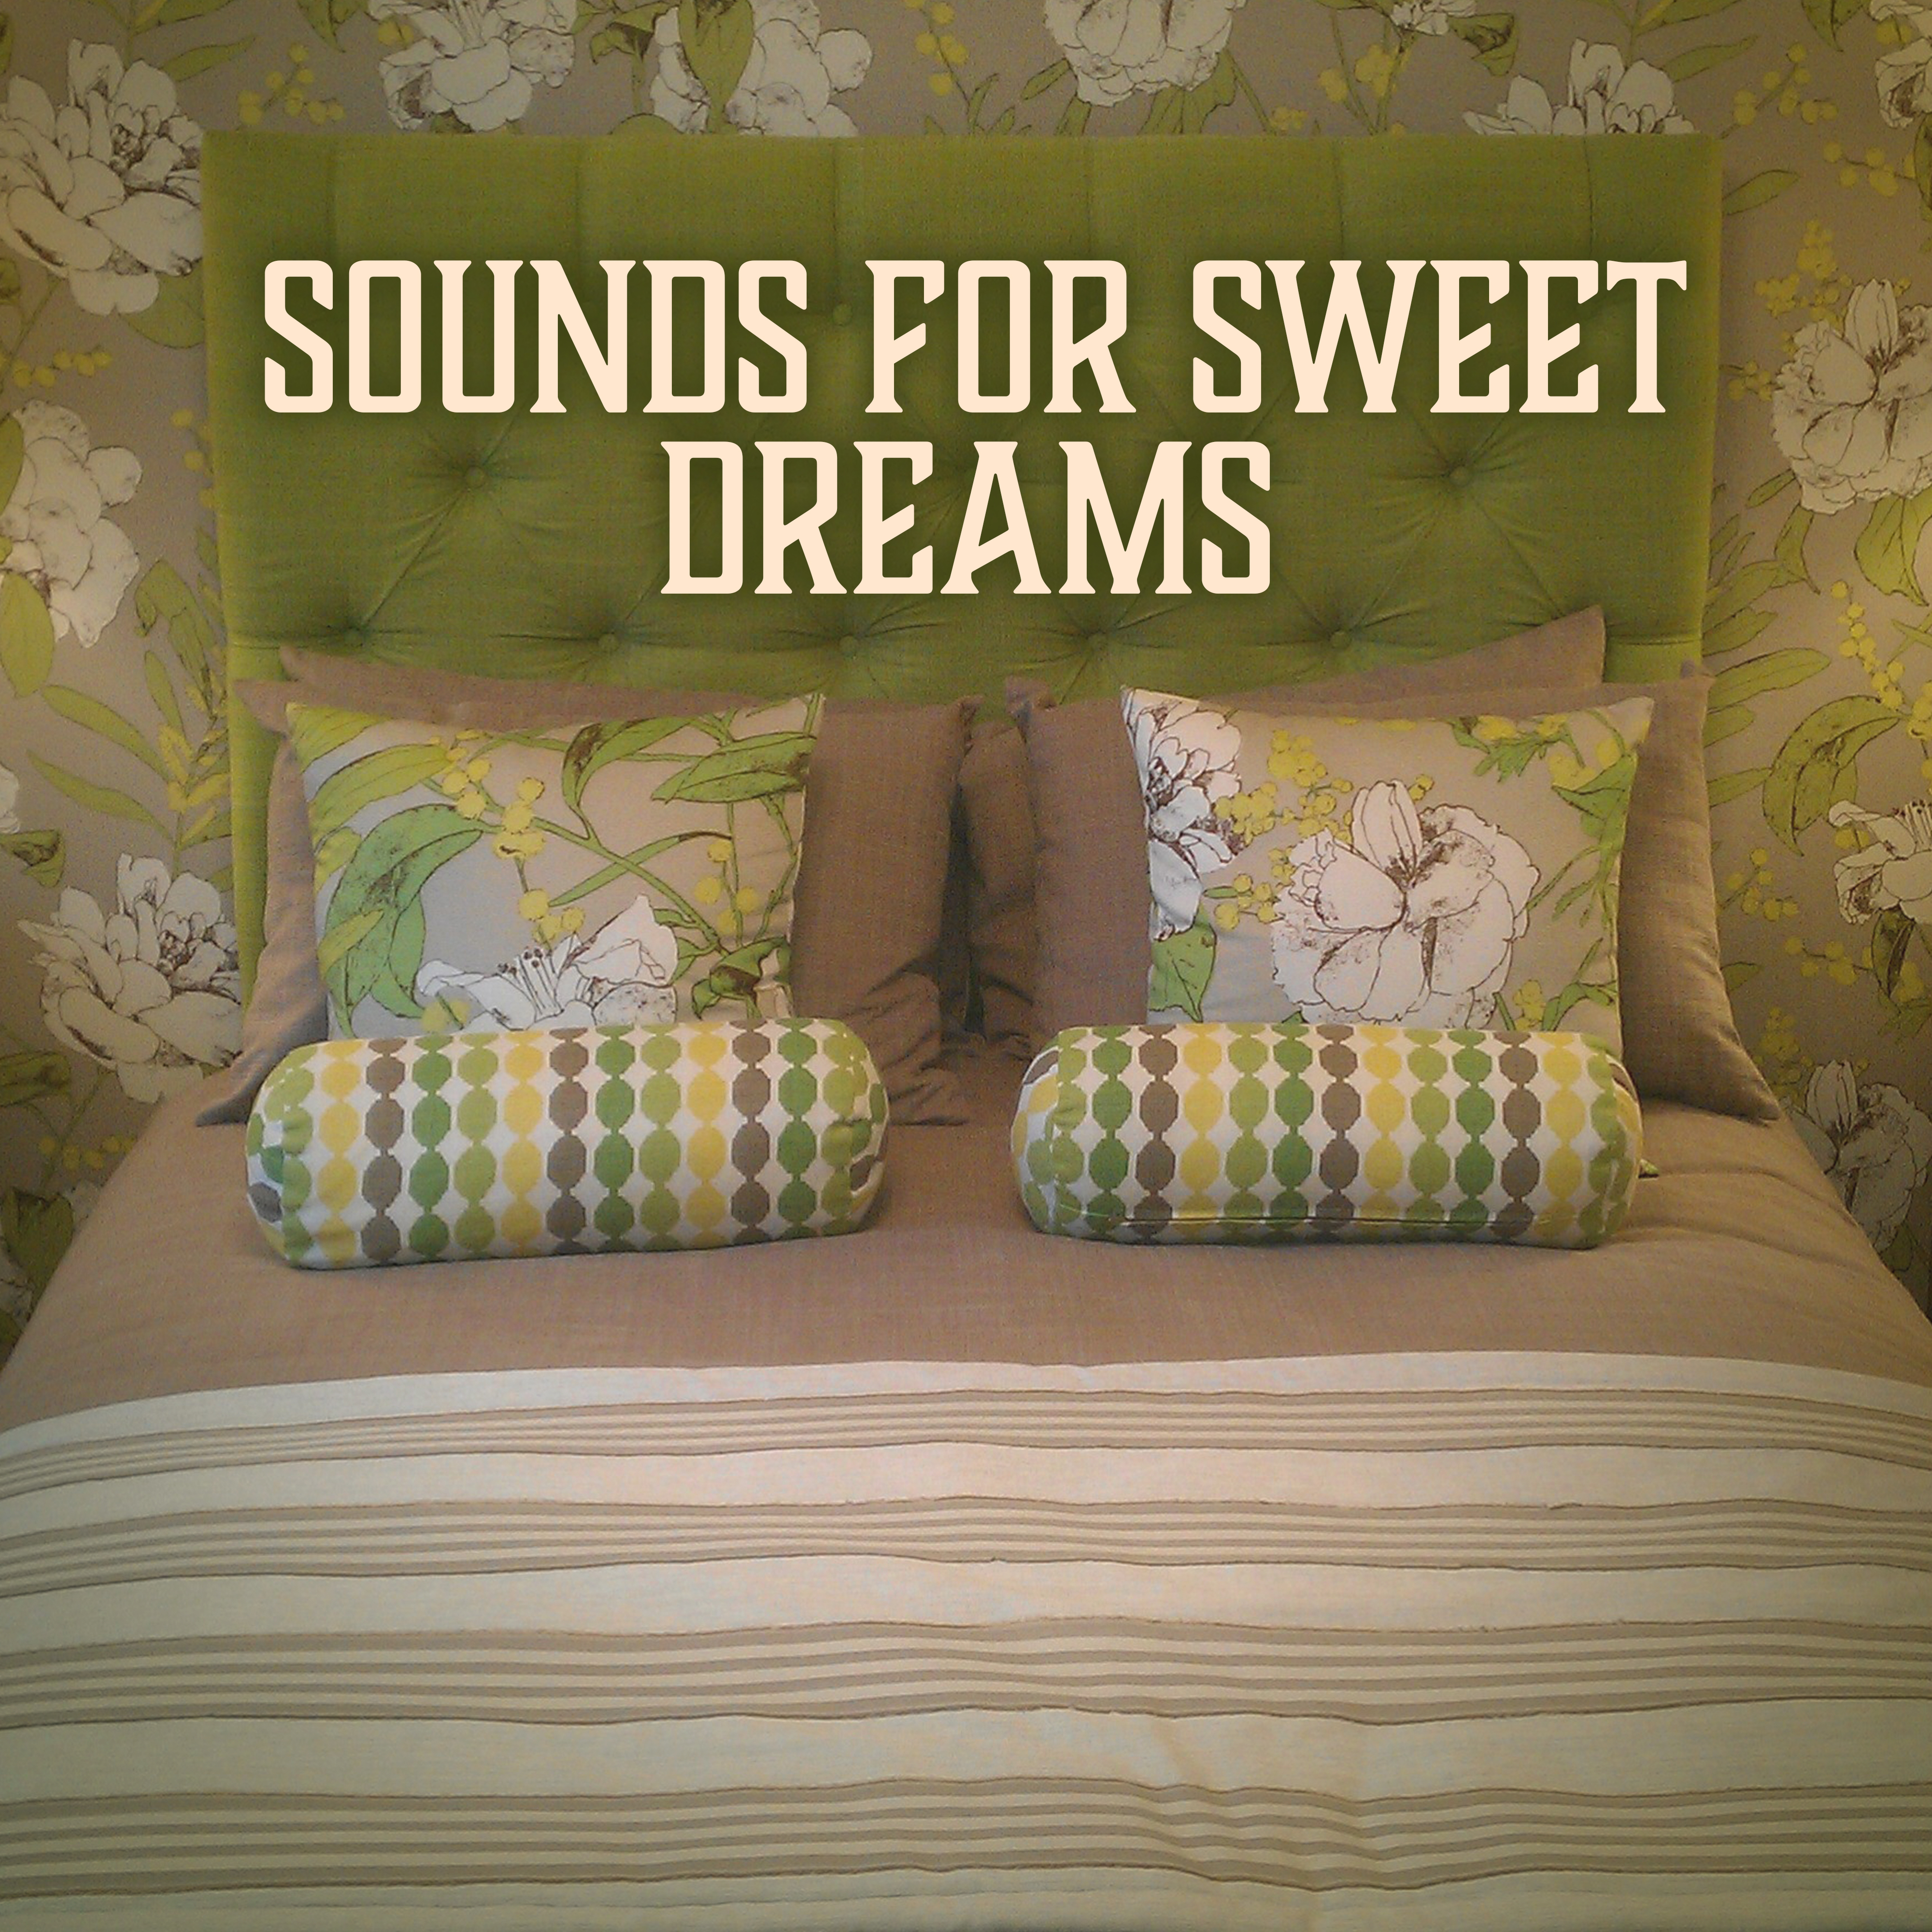 Sounds for Sweet Dreams – Relaxing Waves, Soothing Music, Calm Sleep Melodies, Easy Listening